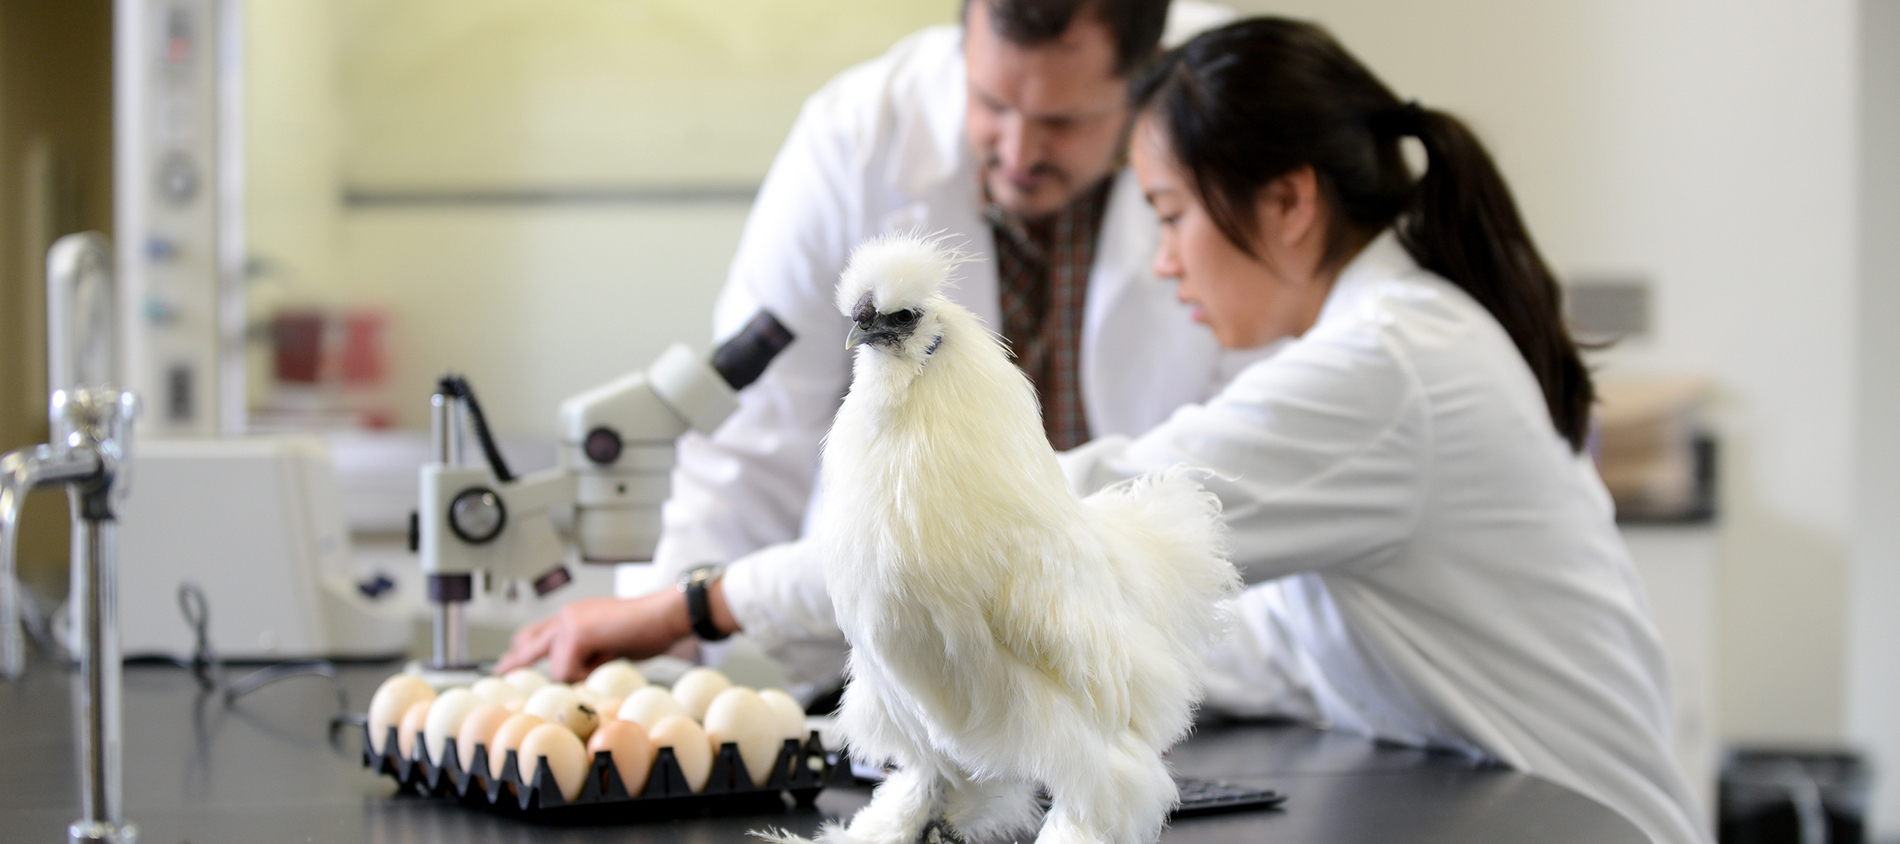 Last Call! Applications for Poultry Science Summer Institute Due